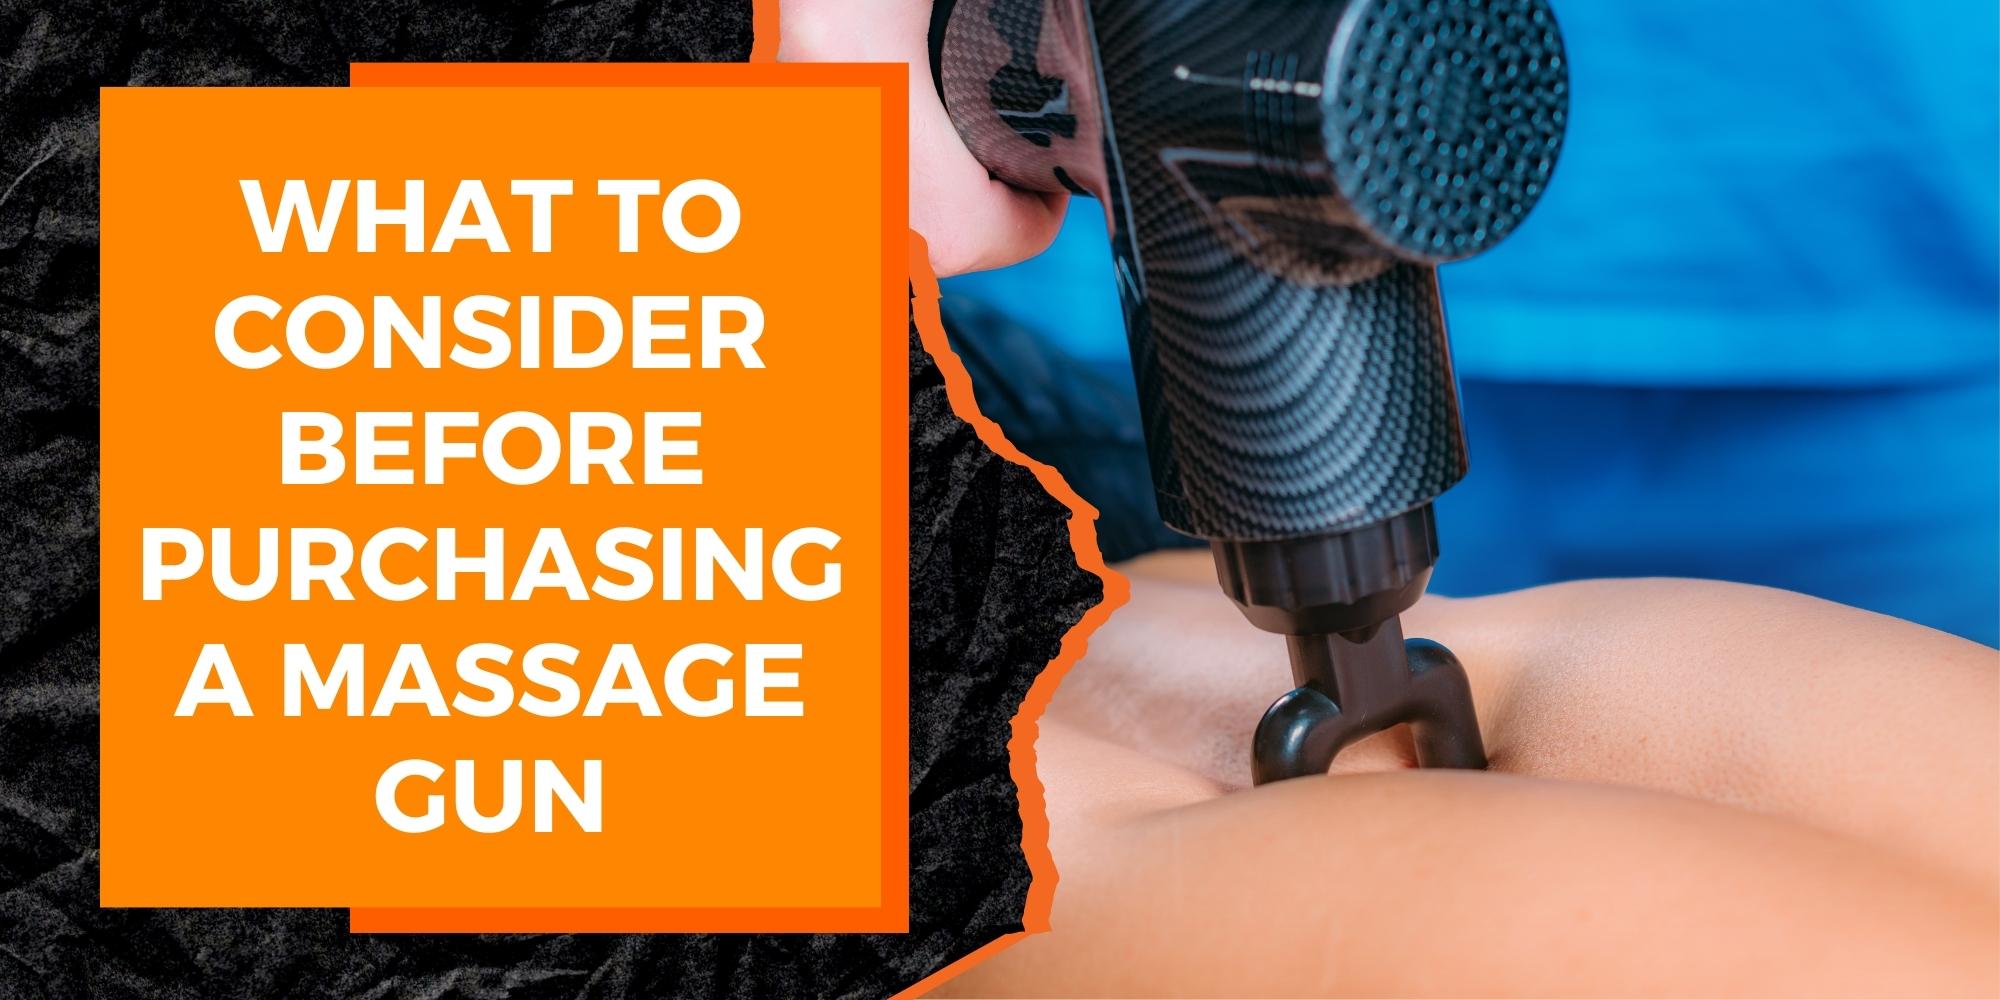 What to Consider Before Purchasing a Massage Gun